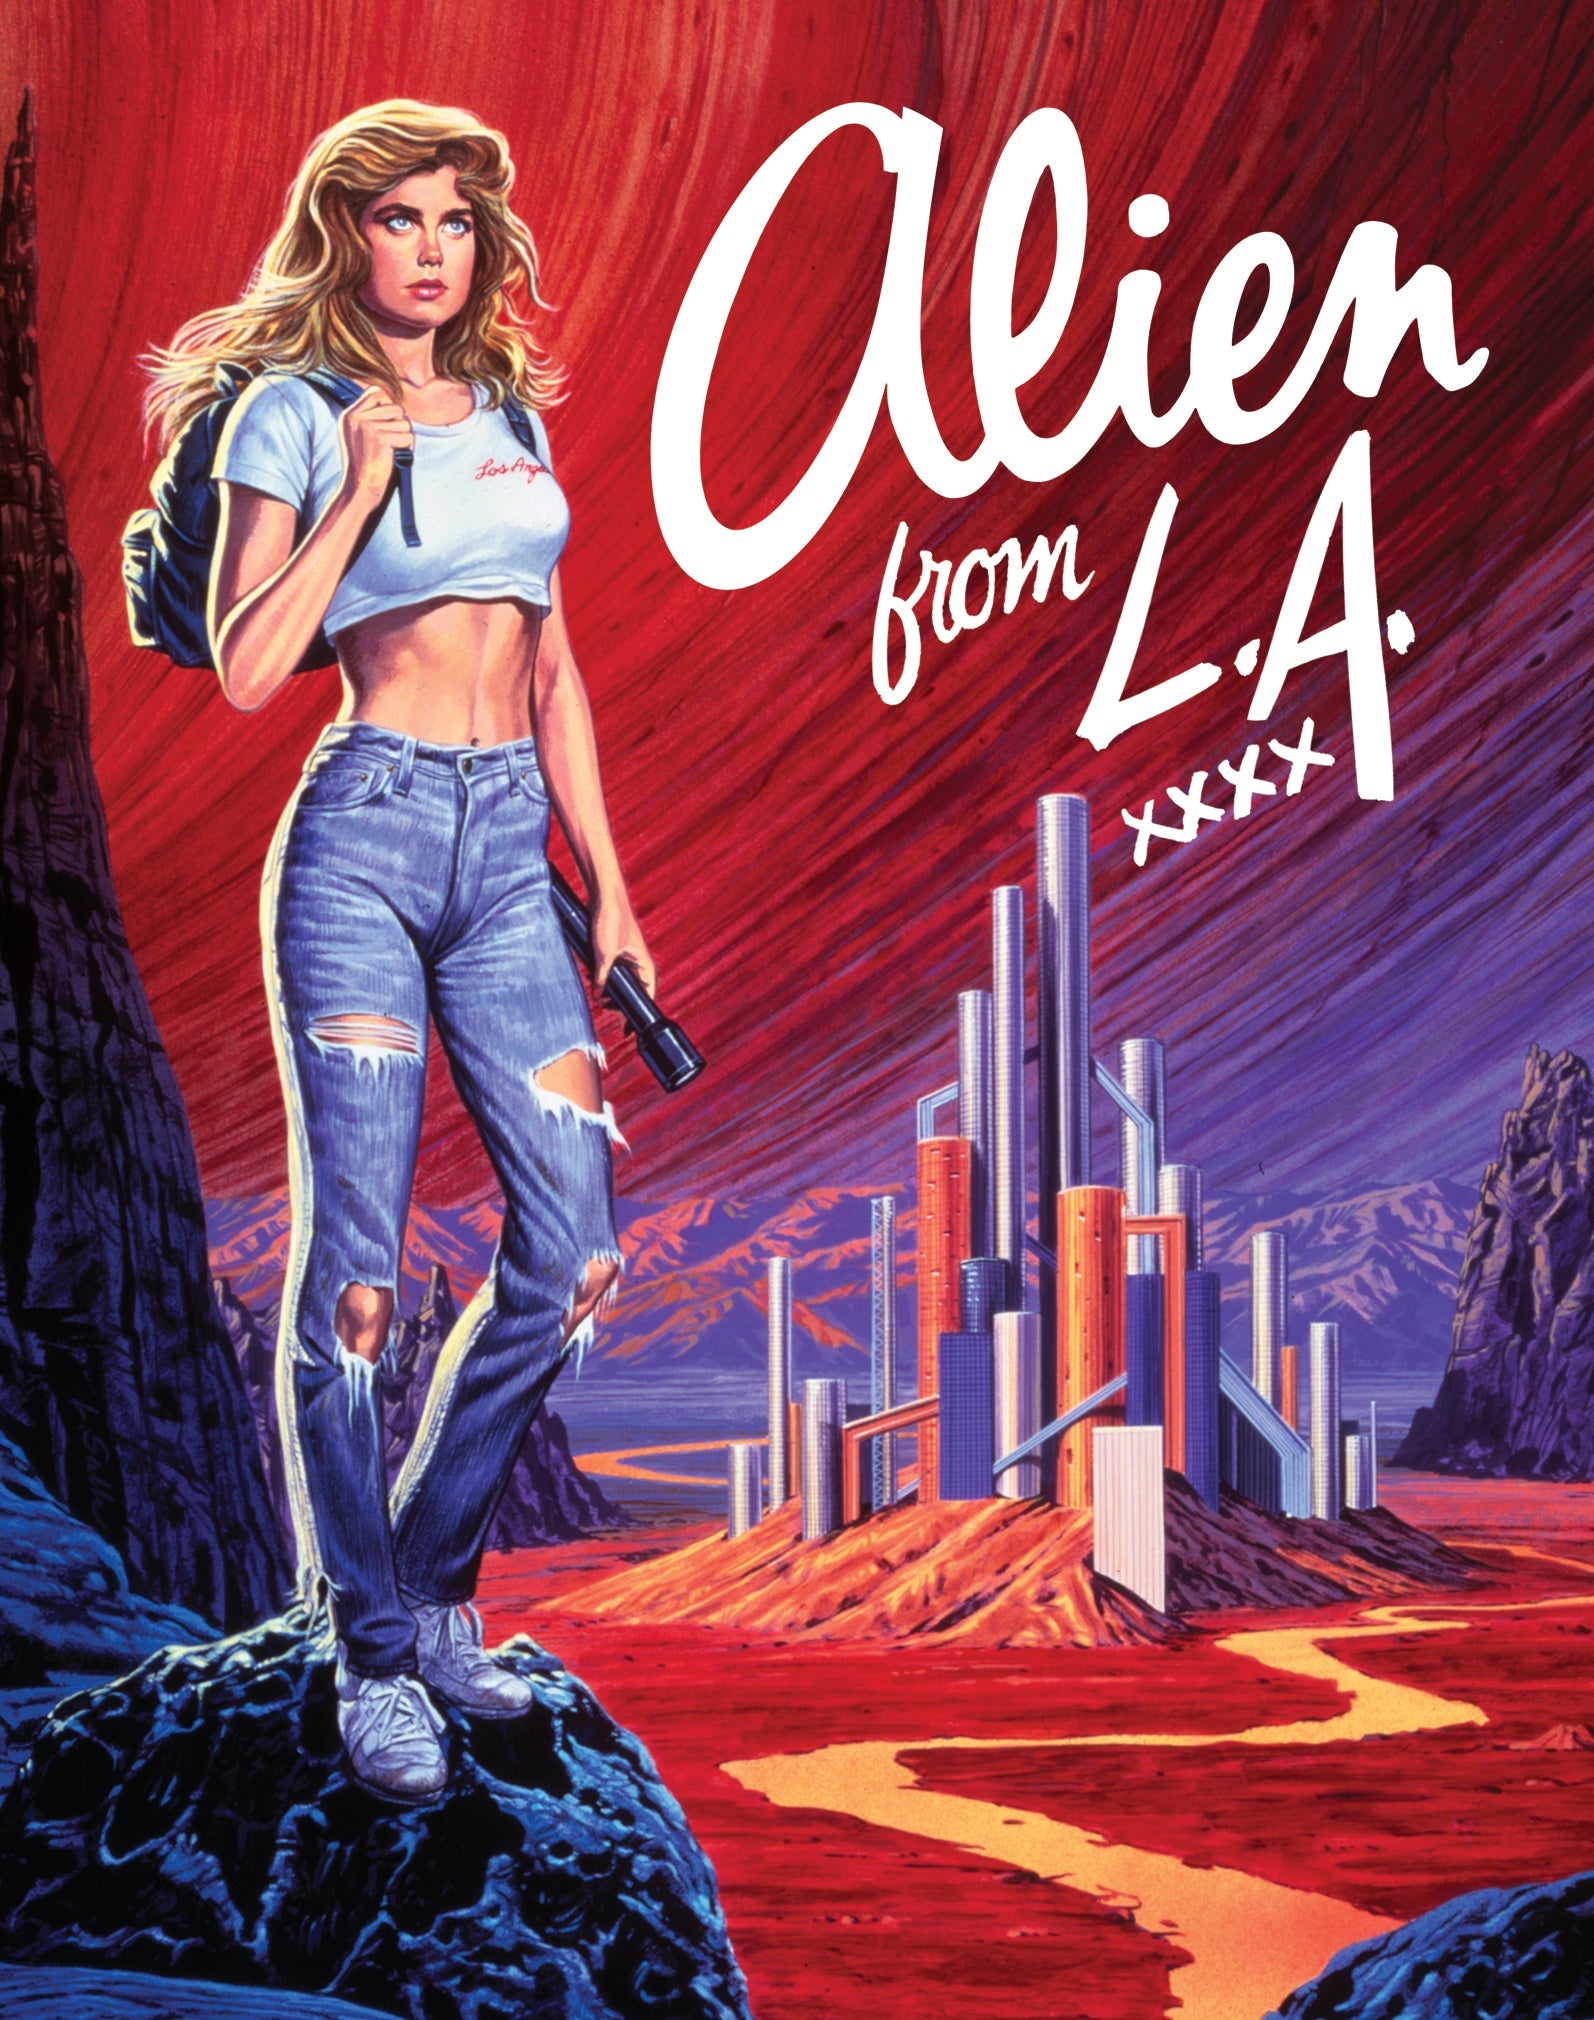 Alien From La (Limited Edition) Blu-Ray Blu-Ray